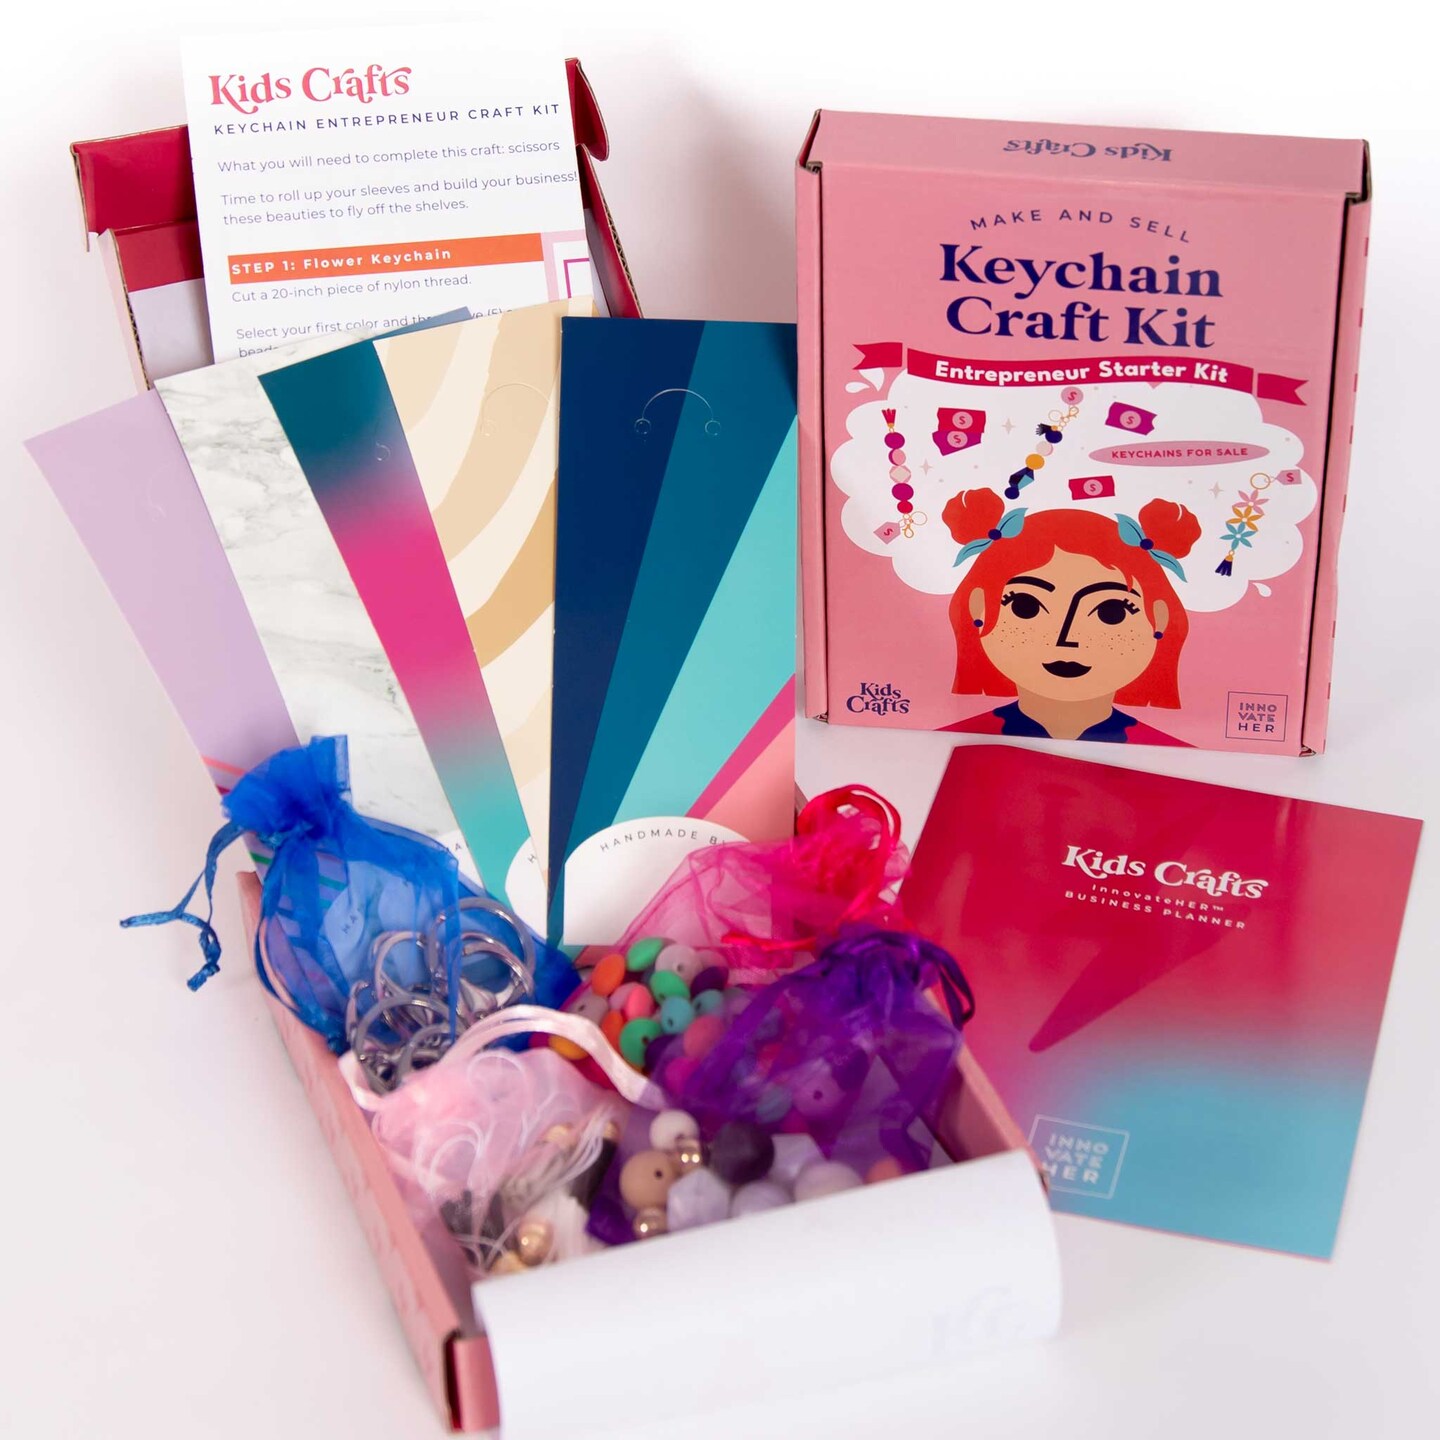 Business in a Box Craft Kit for Kids: Creative Keychains DIY Craft